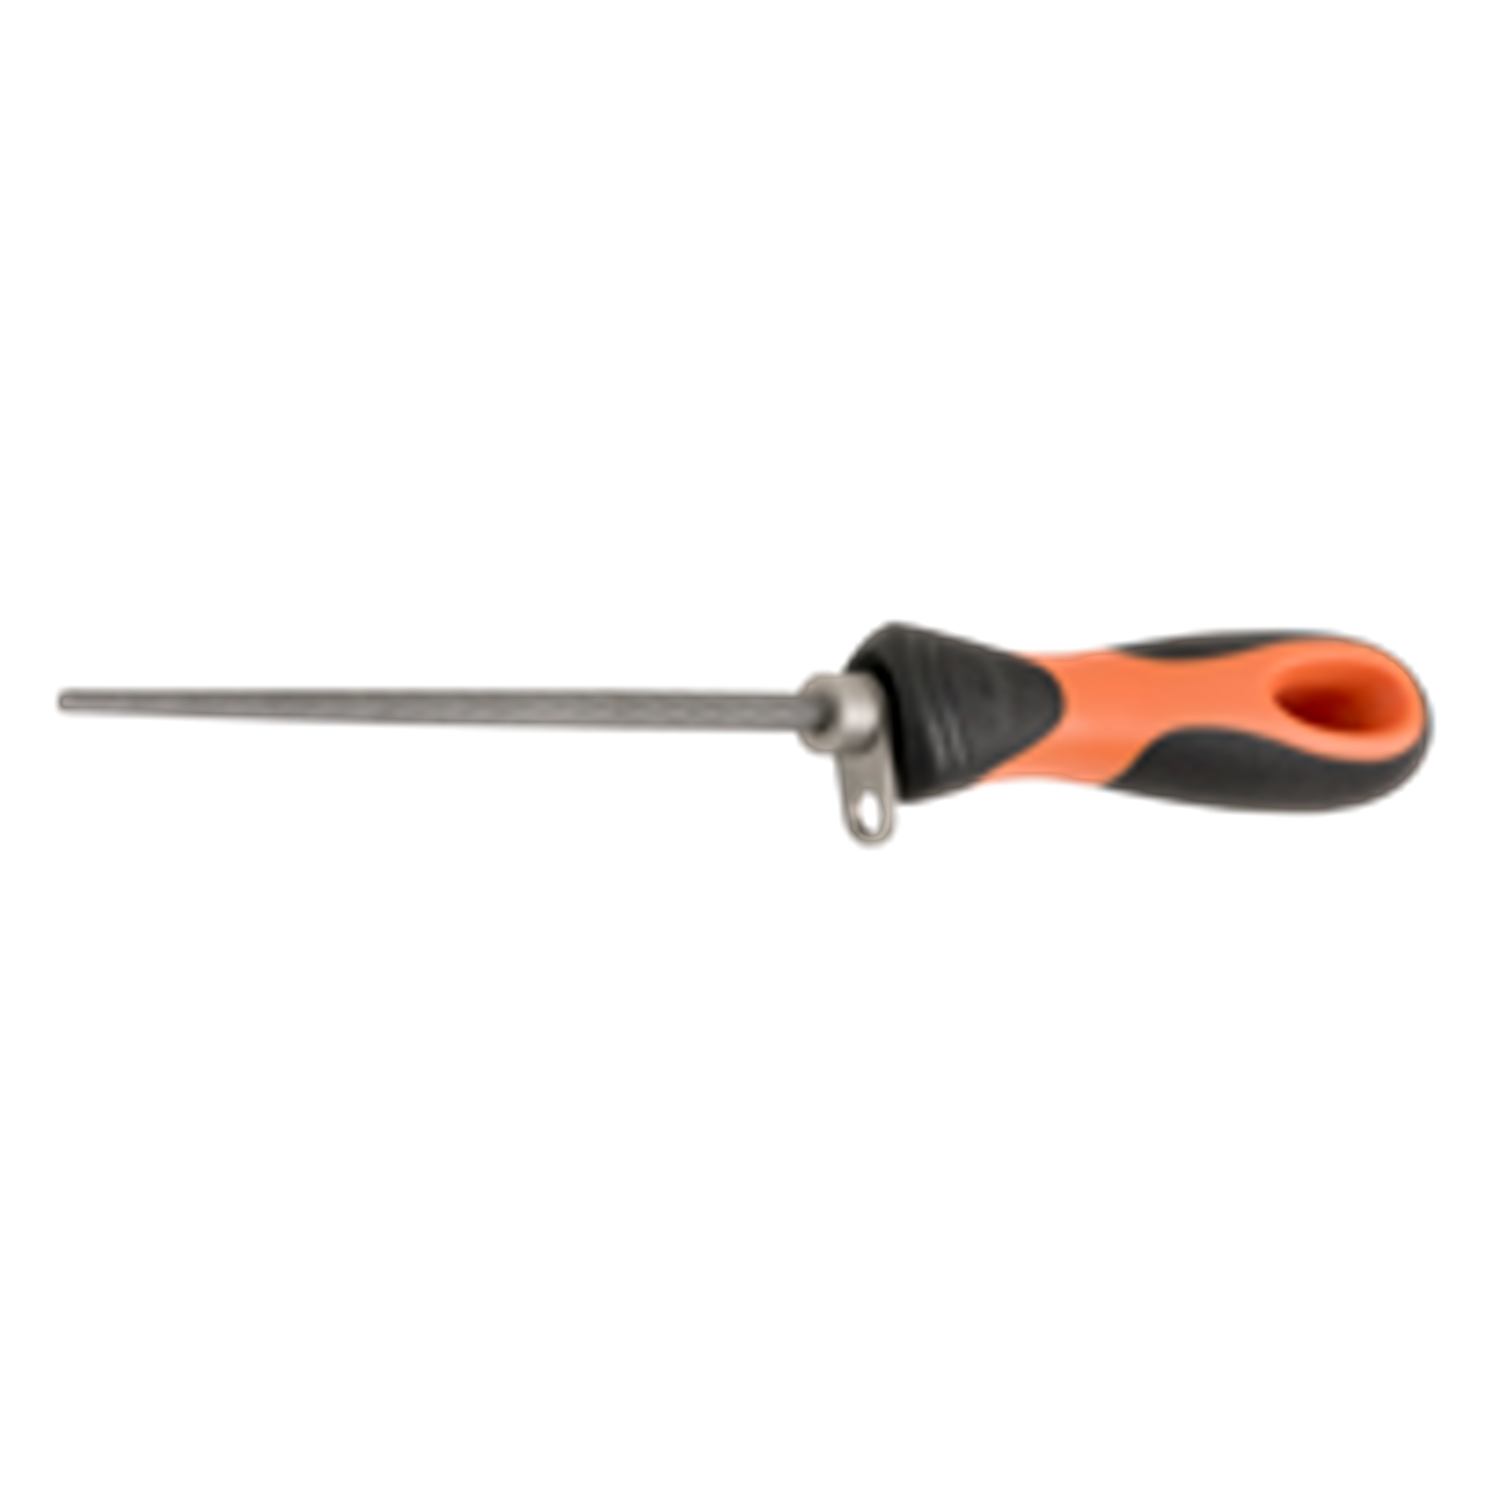 BAHCO TAH1-230 ERGO Round File with Safety Chuck (BAHCO Tools) - Premium Round File from BAHCO - Shop now at Yew Aik.